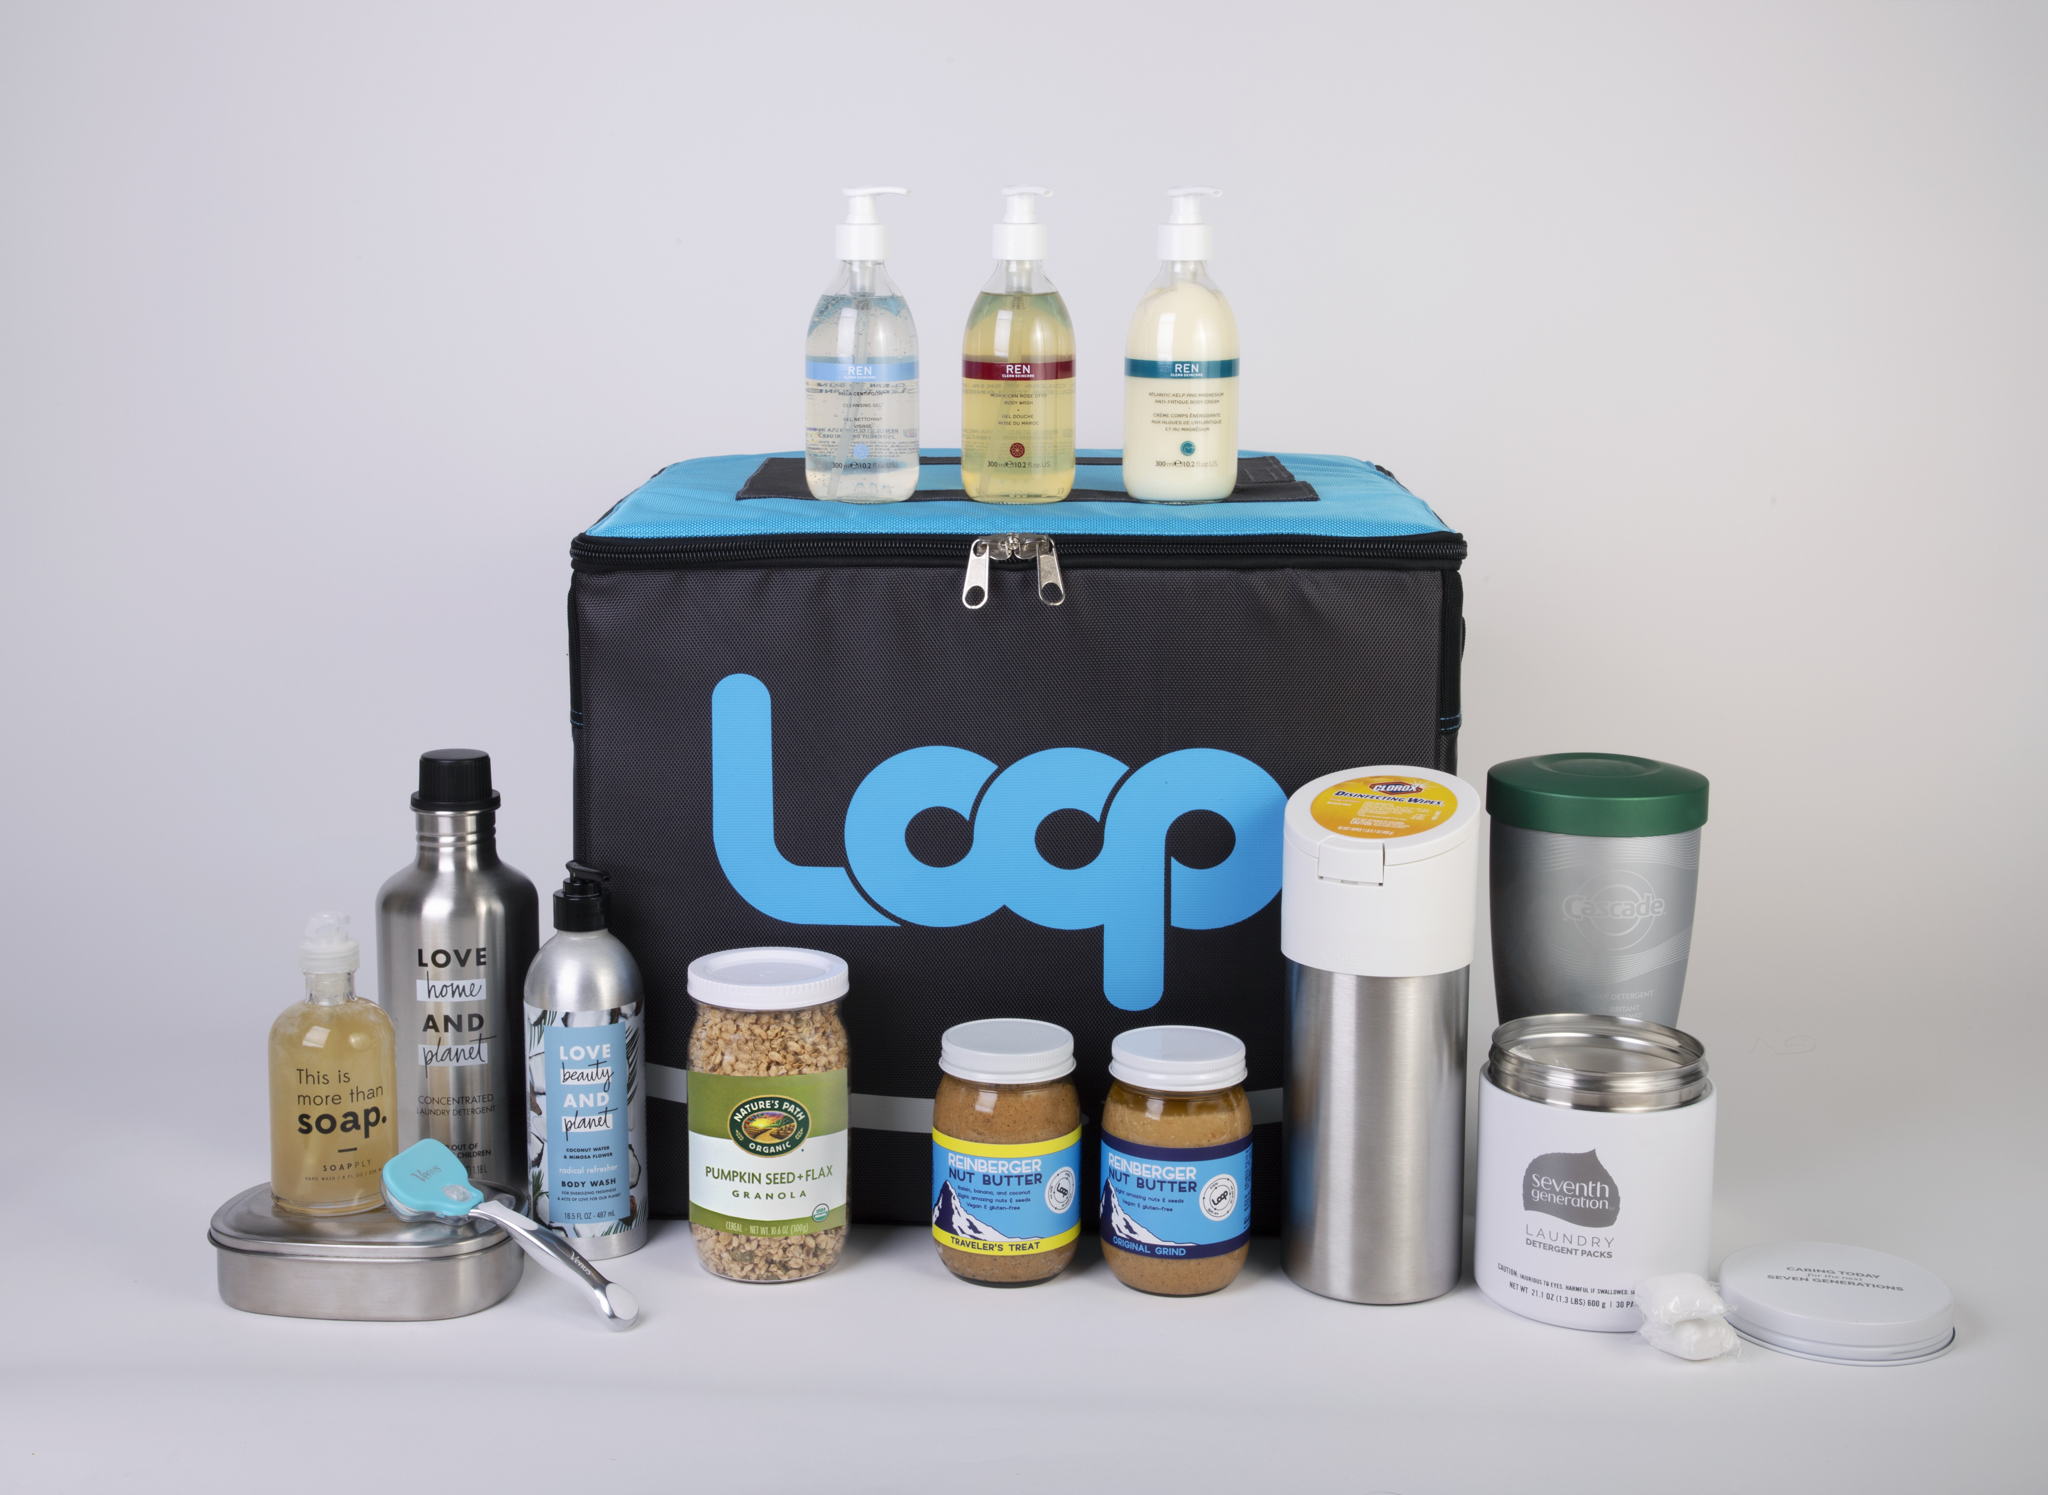 Loop's Global Reuse Shopping System Is Eliminating Waste Through A